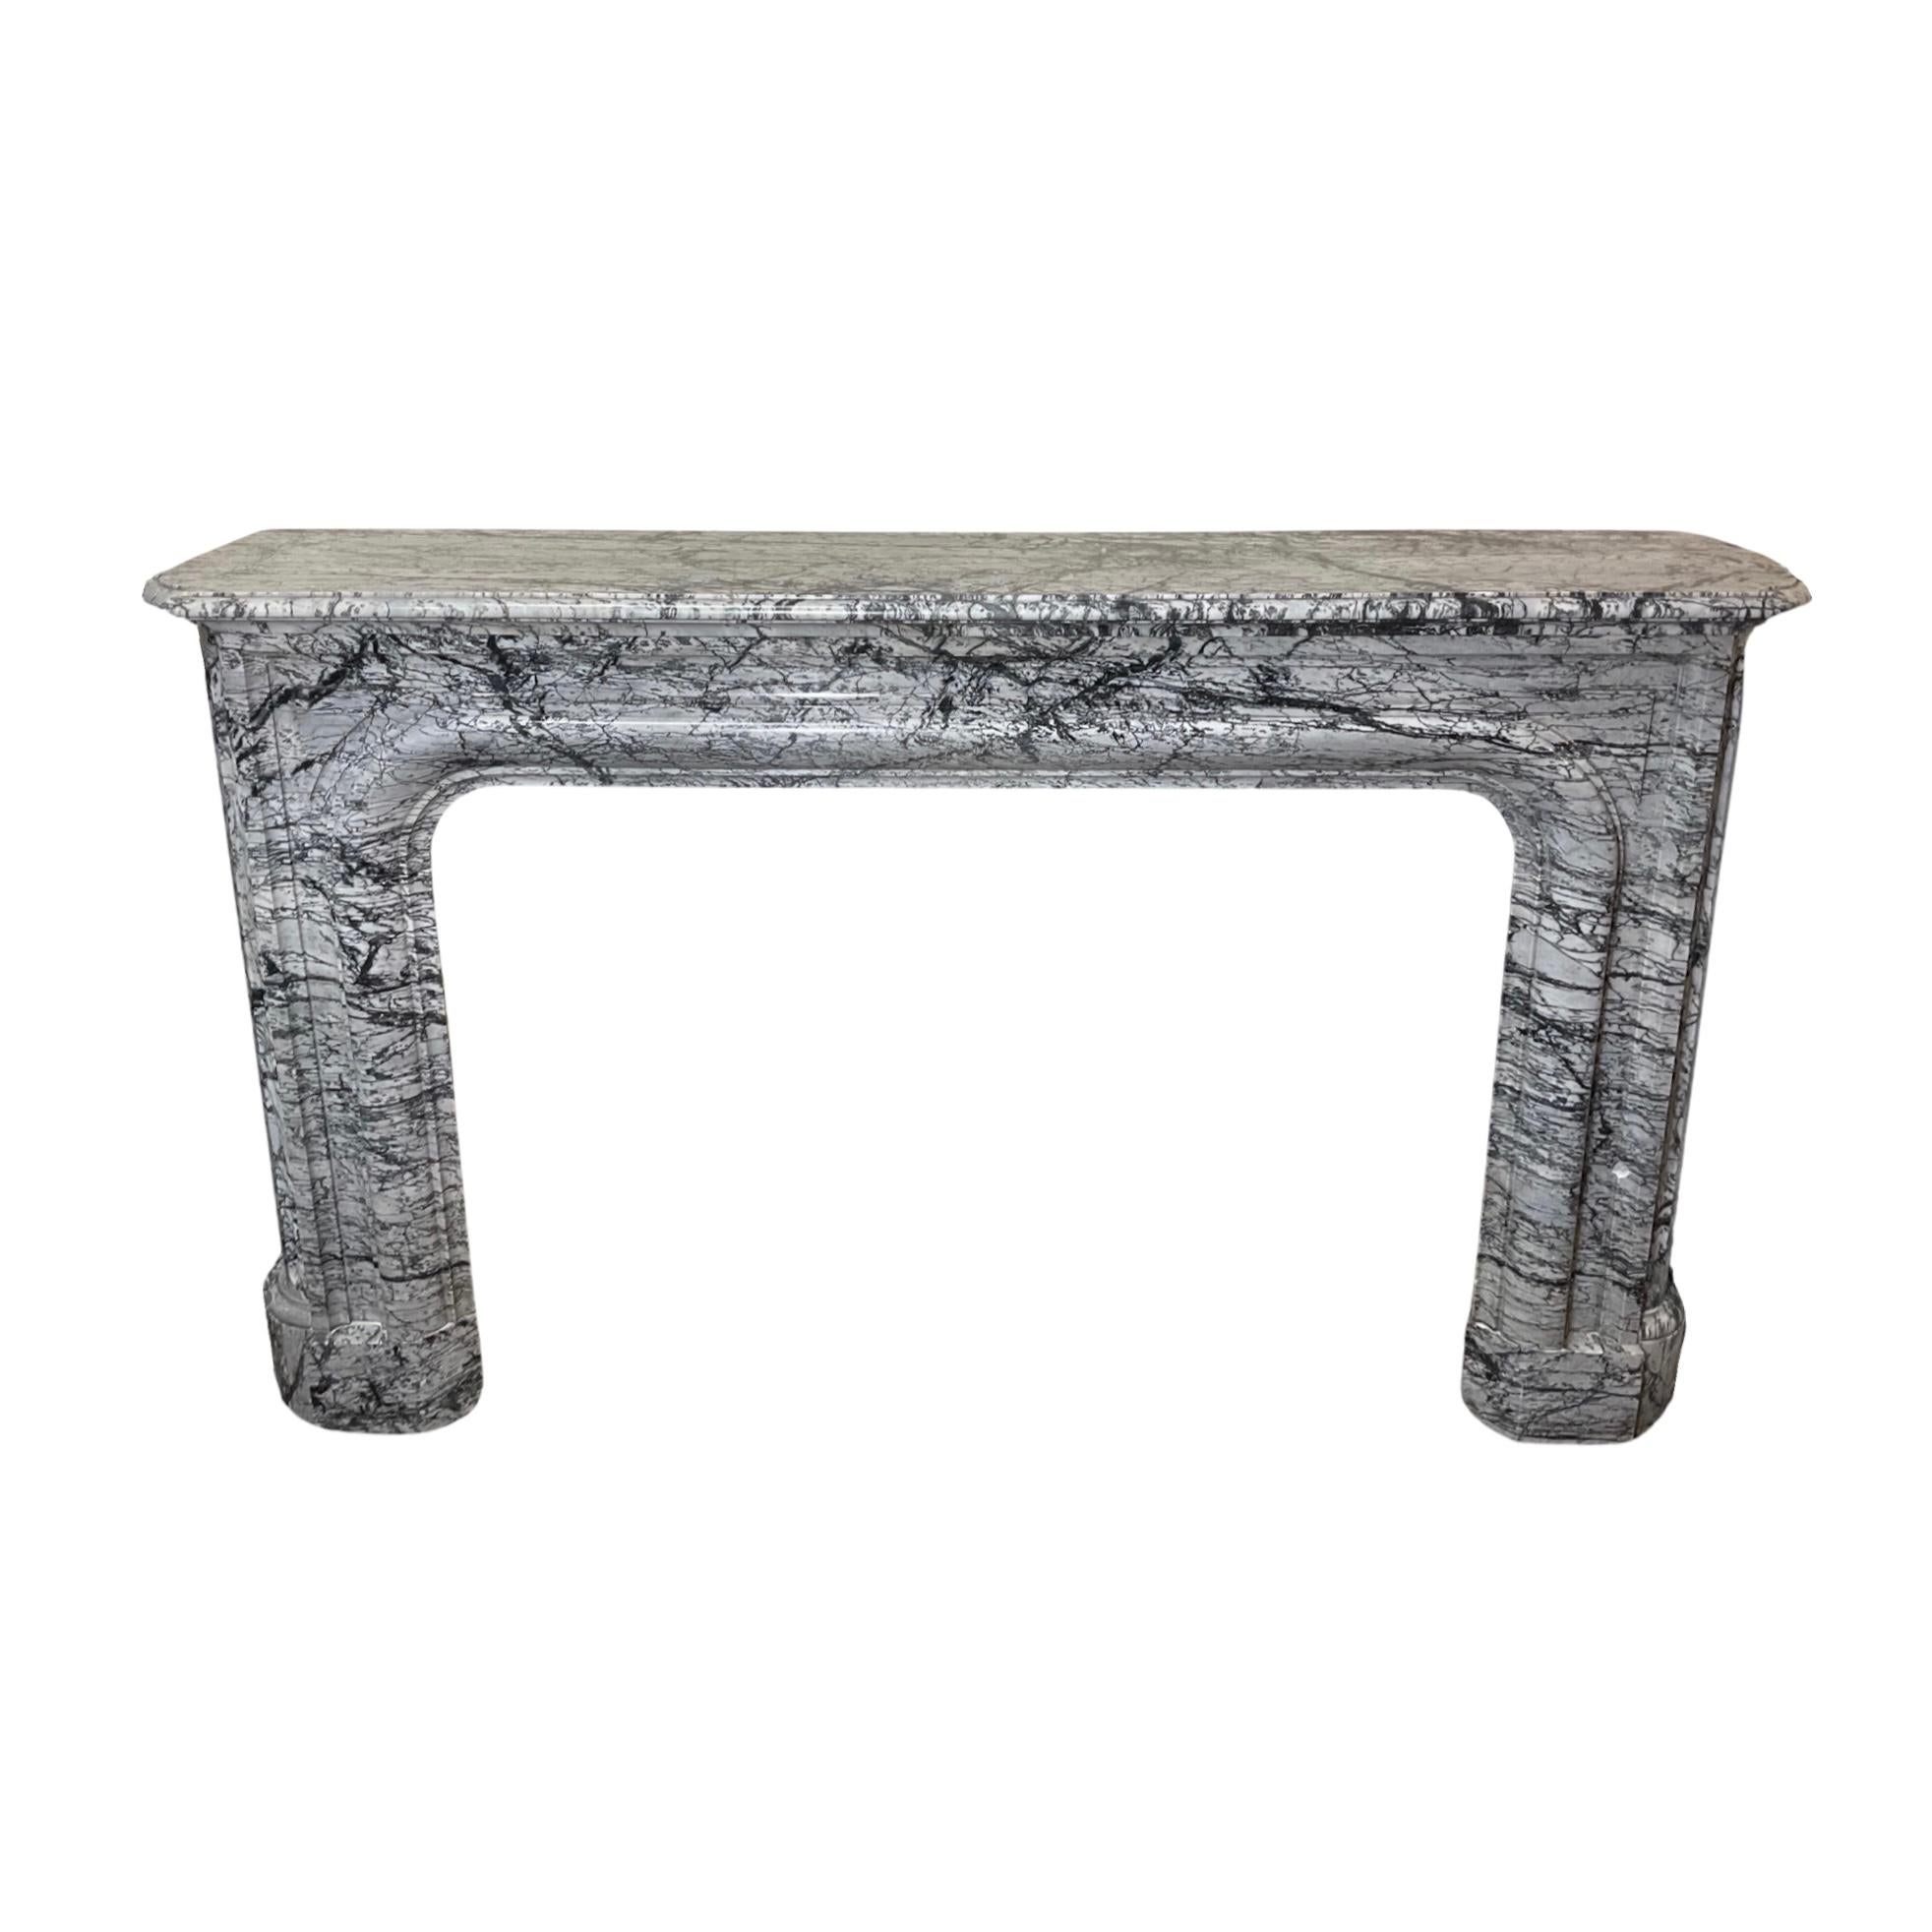 This French Bleu Fleuri Marble Mantel is a one-of-a-kind piece. Crafted from Bleu Fleuri marble from 1870, this unique mantel is a louis the 13th style, bringing a classic, traditional touch to your home.